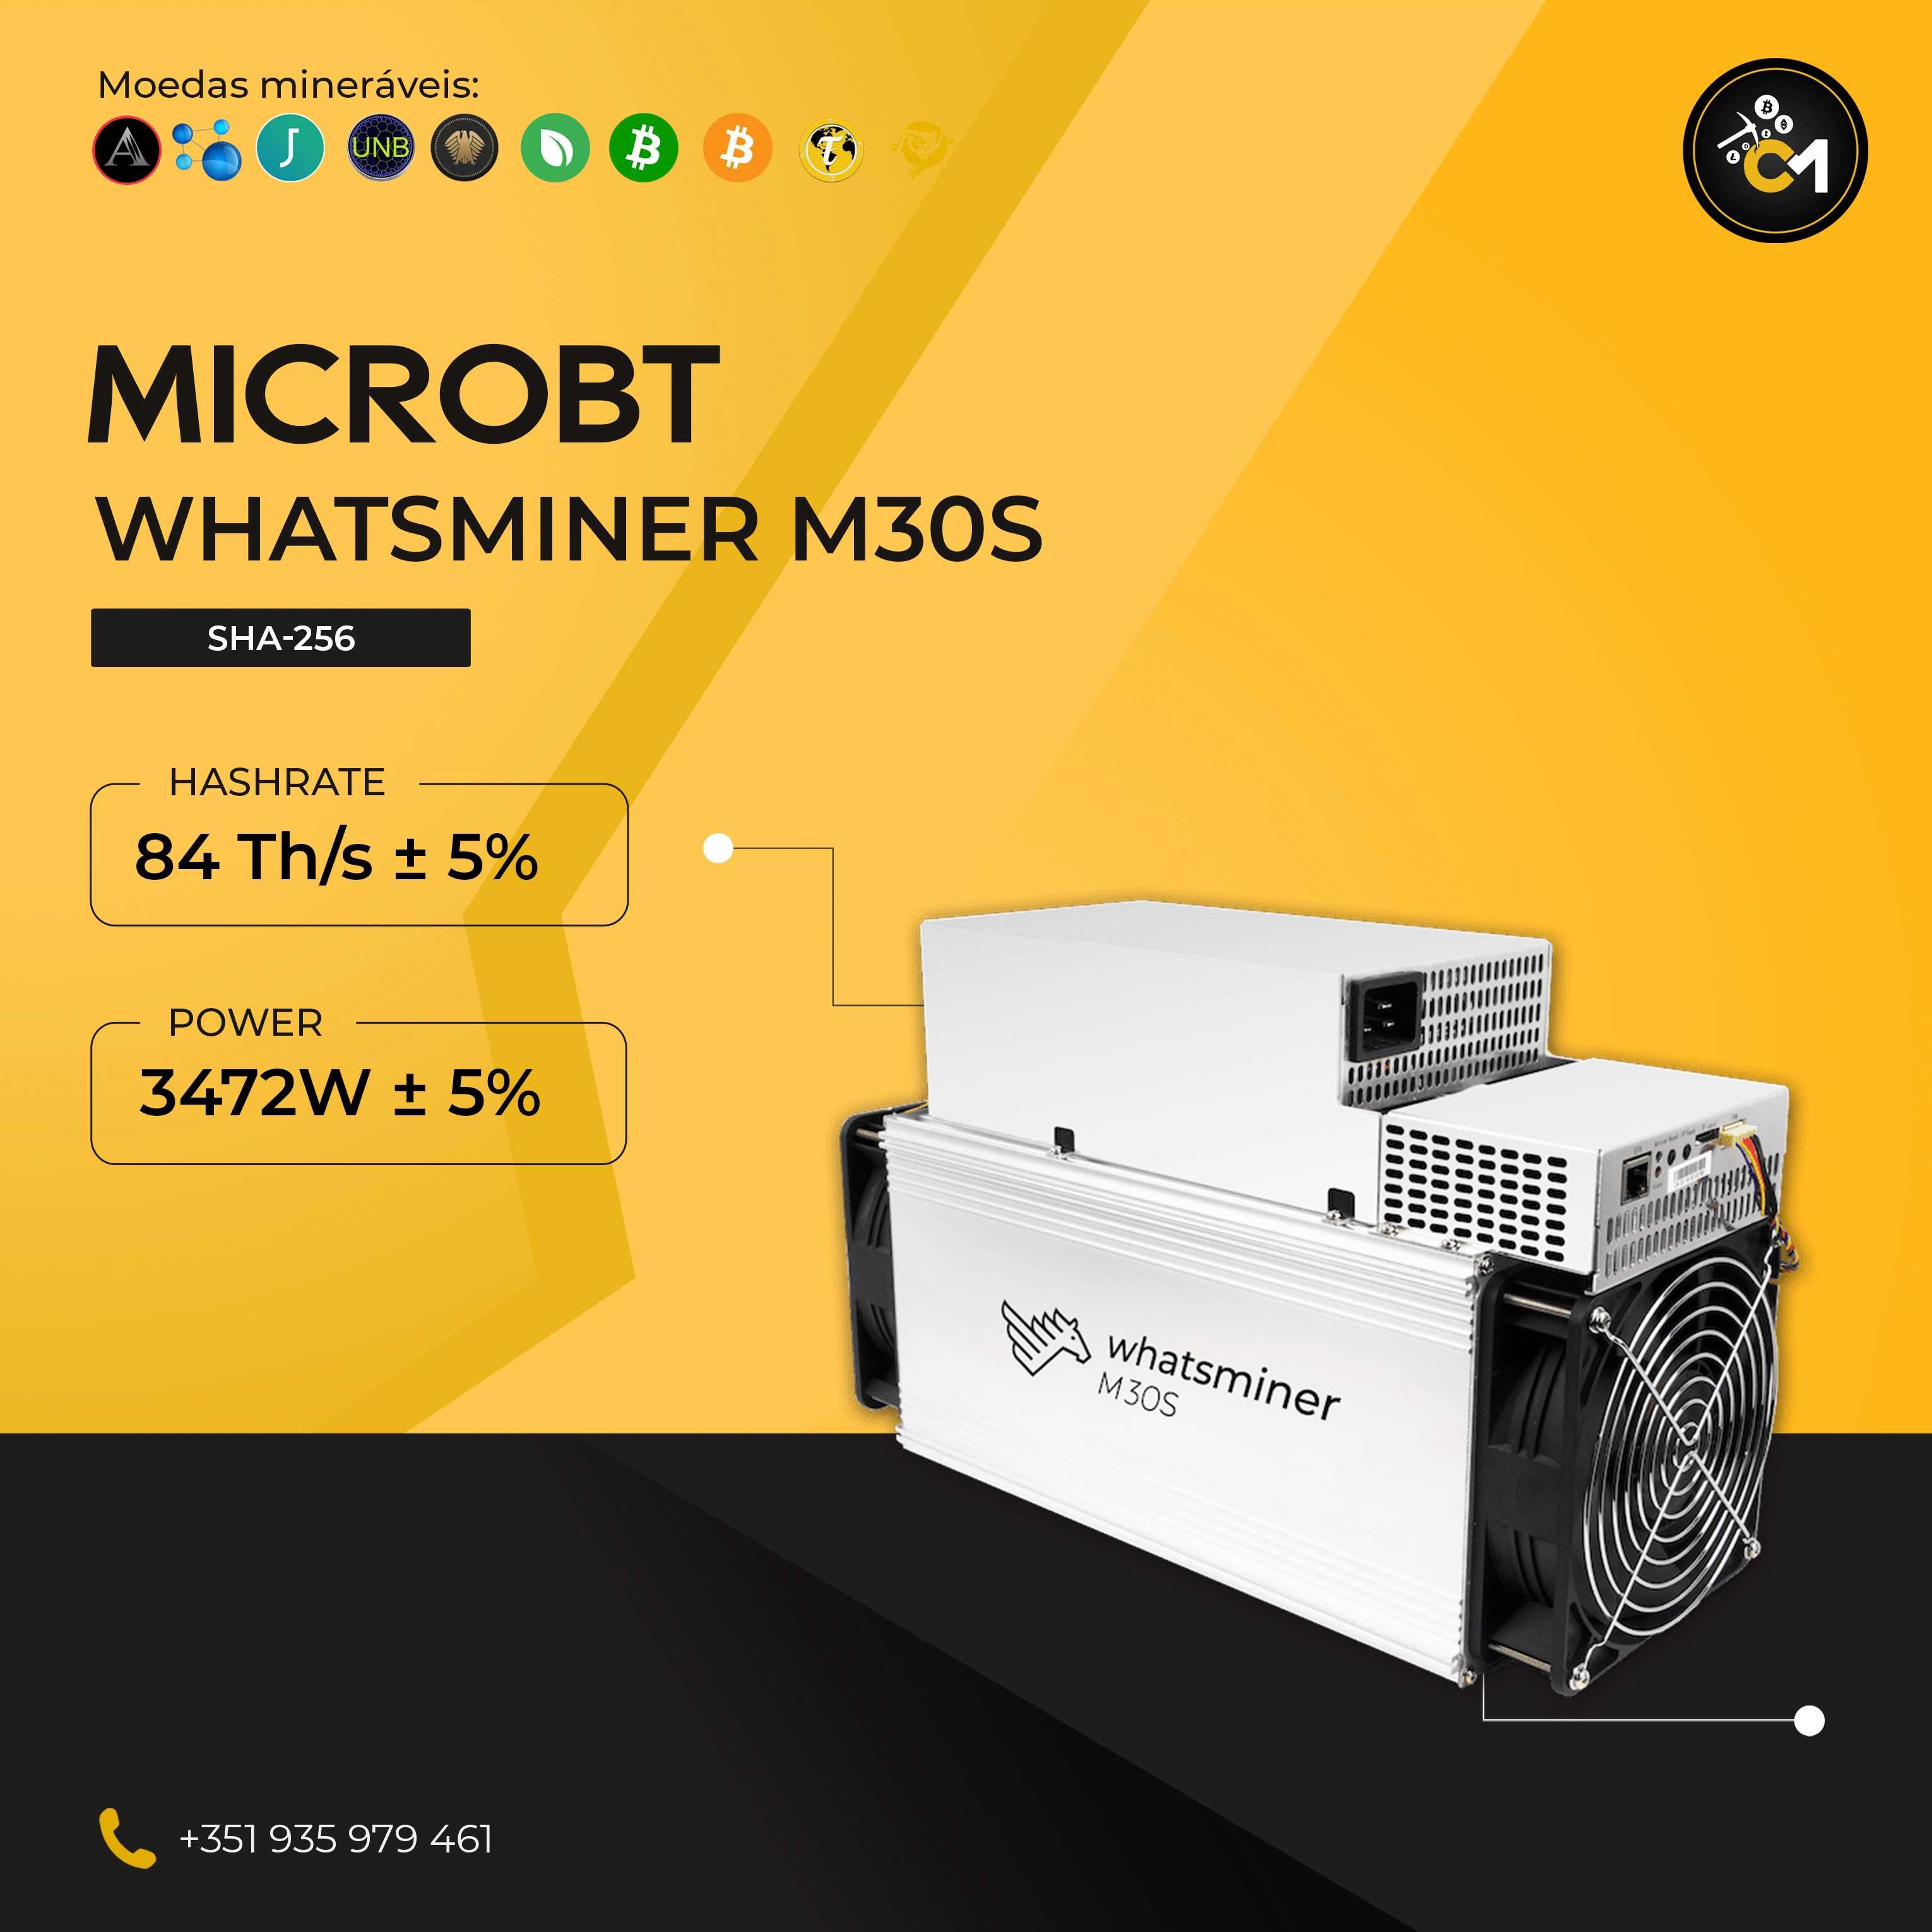 MicroBT Whatsminer M30S 84 Th/s